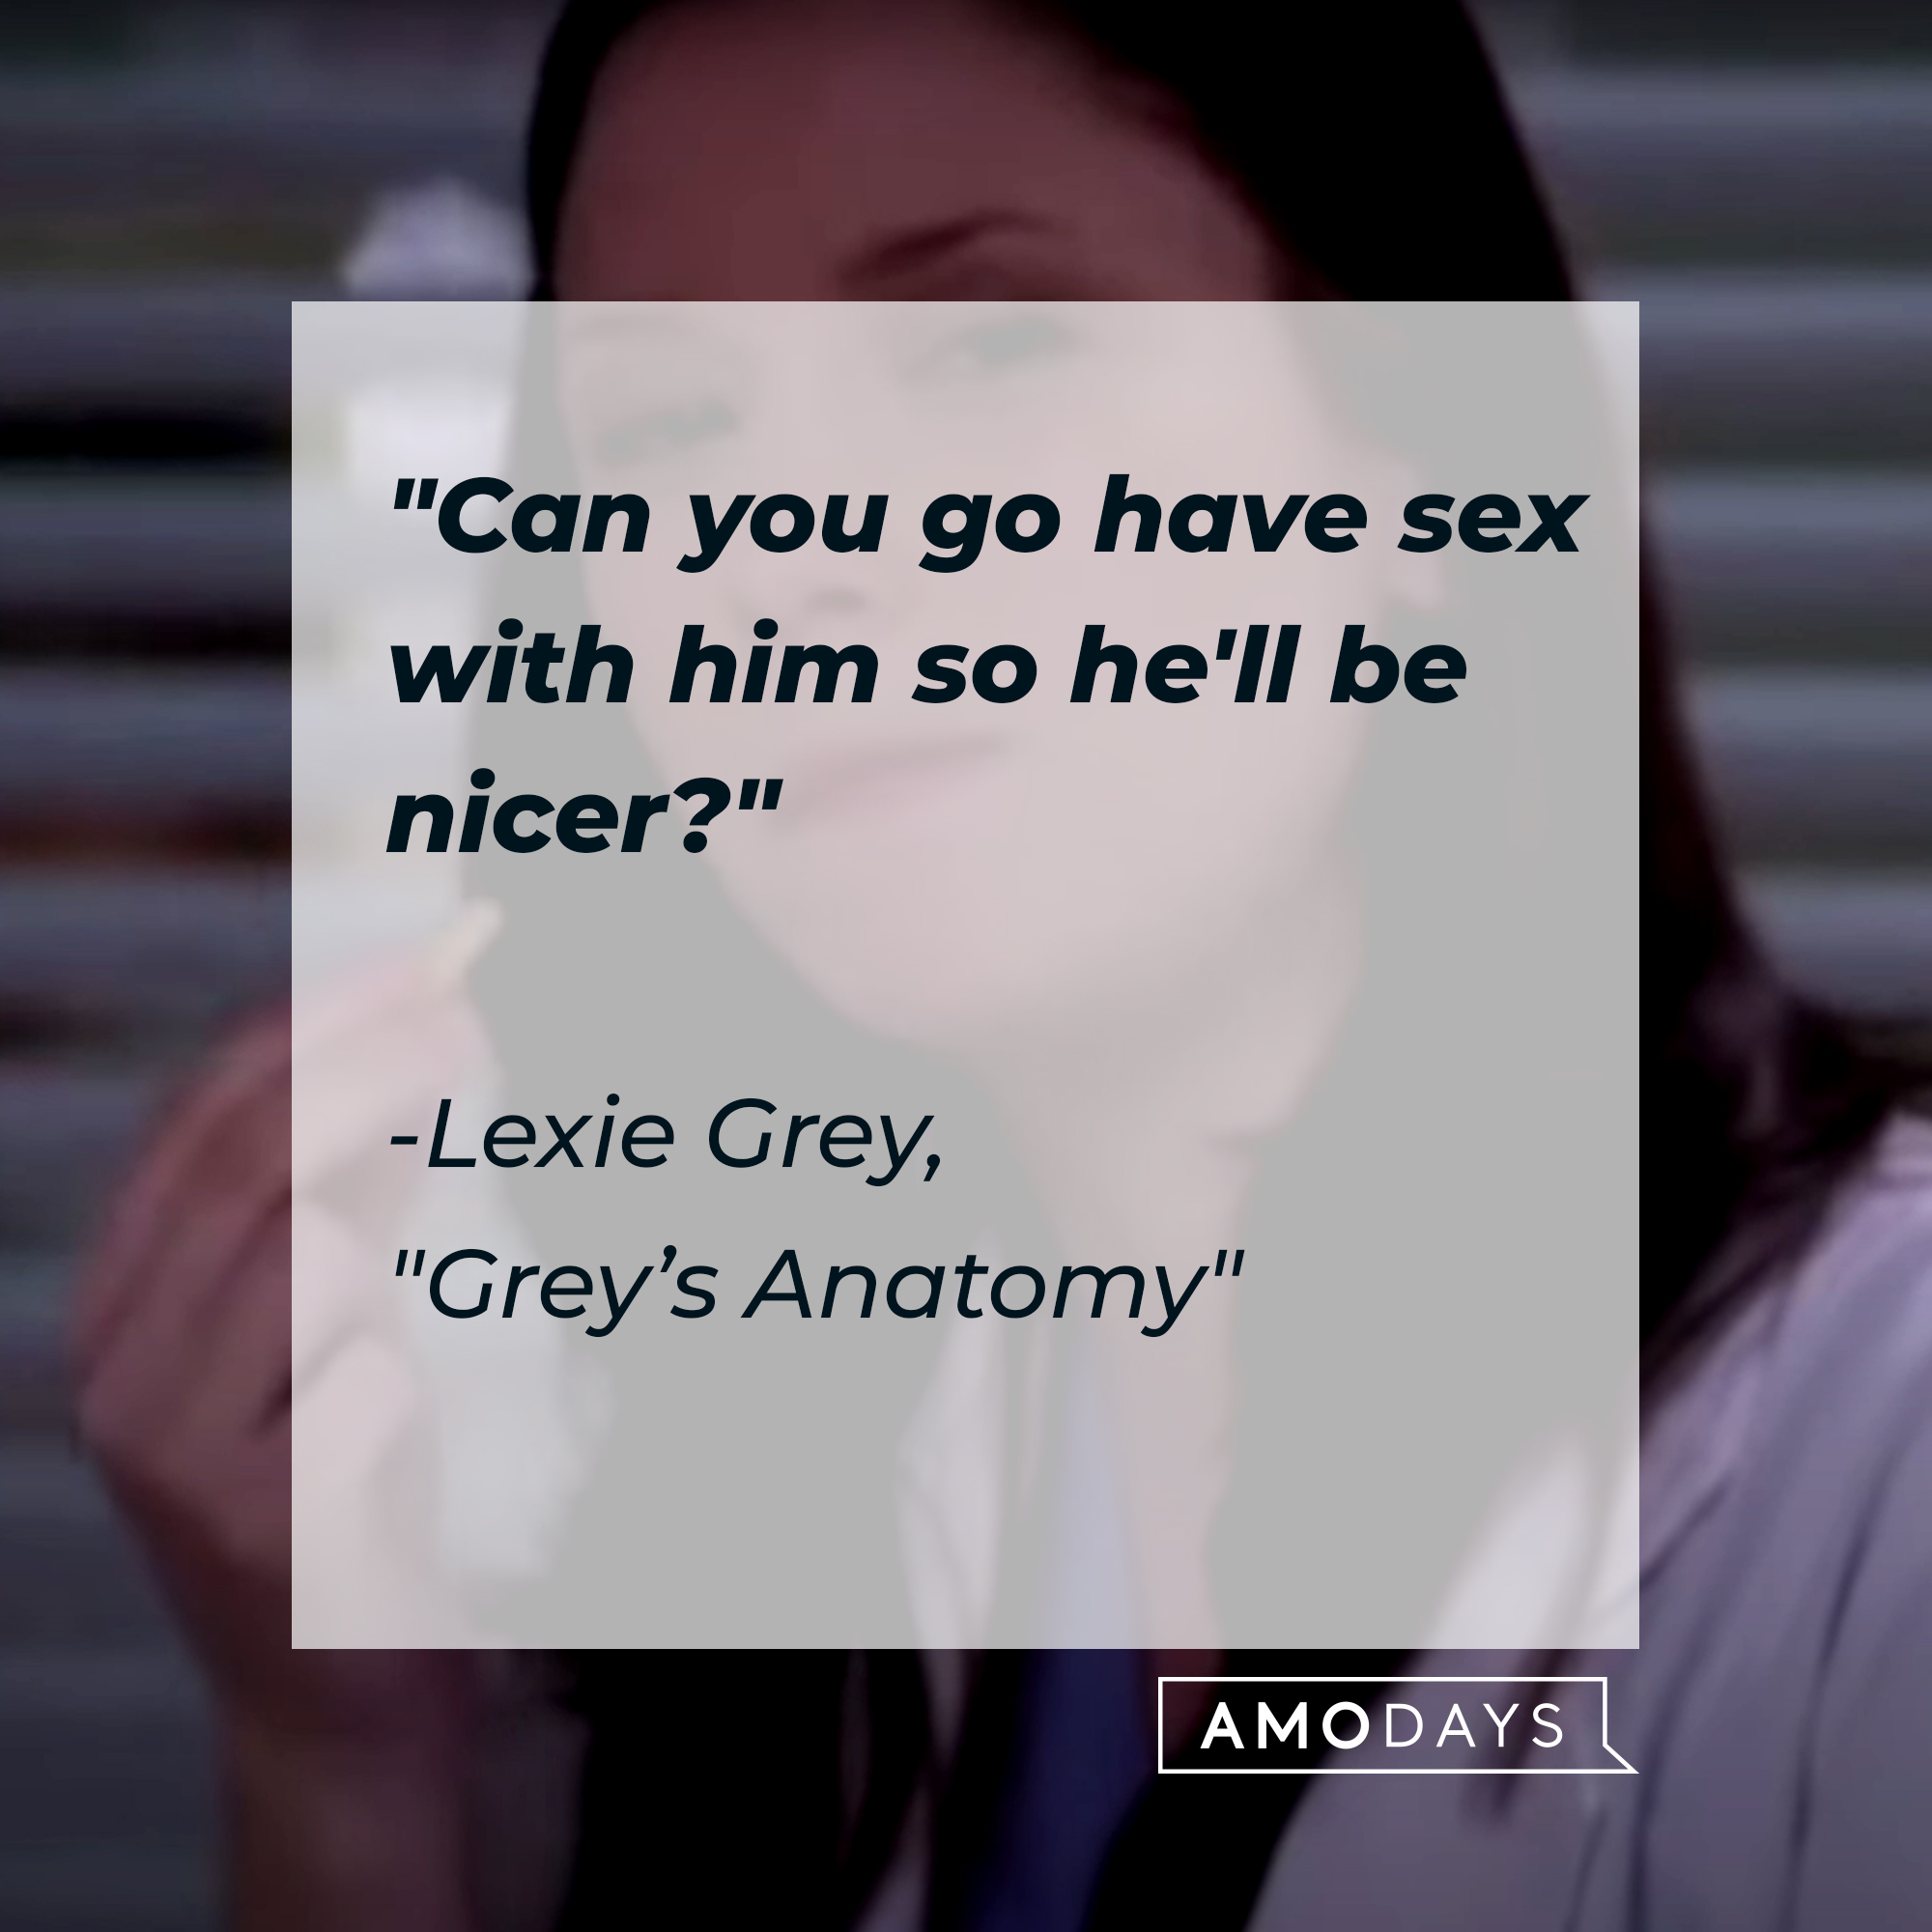 Lexie Grey with her quote: "Can you go have sex with him so he'll be nicer?" | Source: Facebook.com/GreysAnatomy